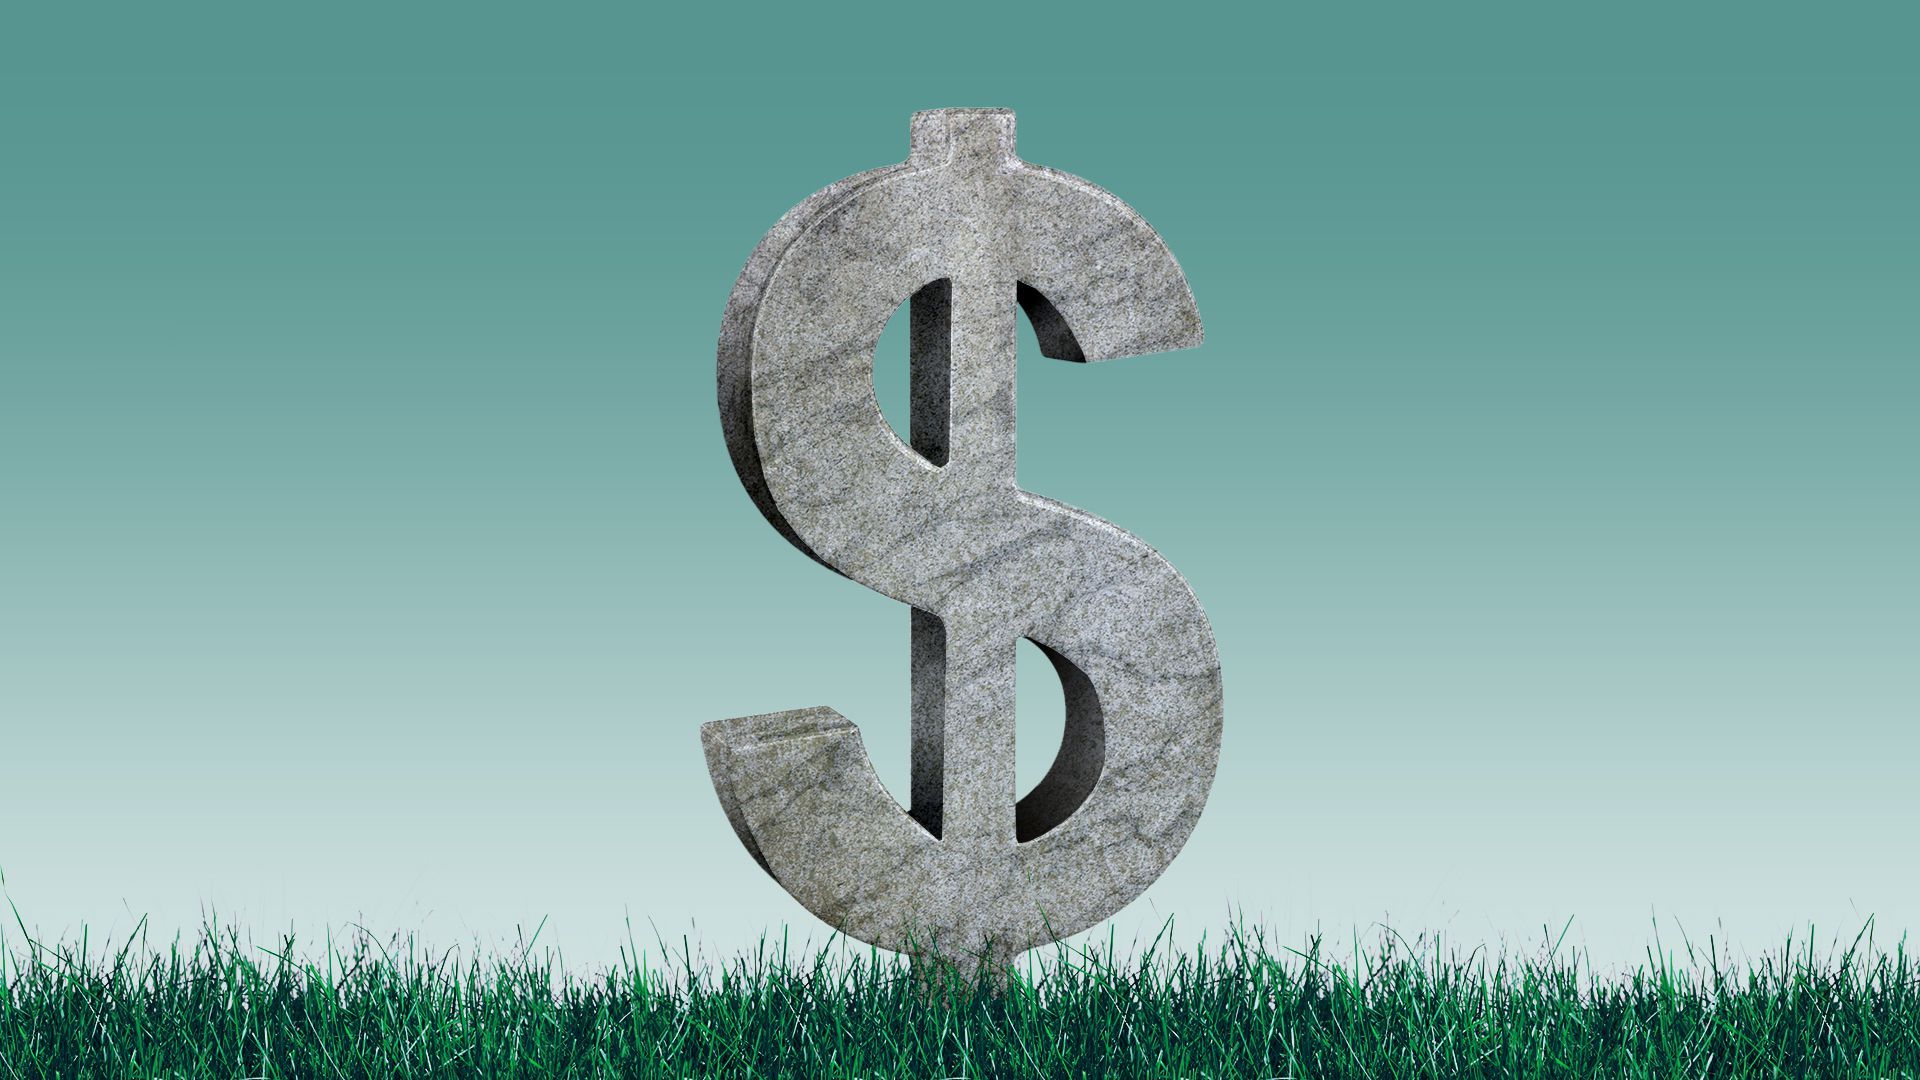 A dollar sign on the grass